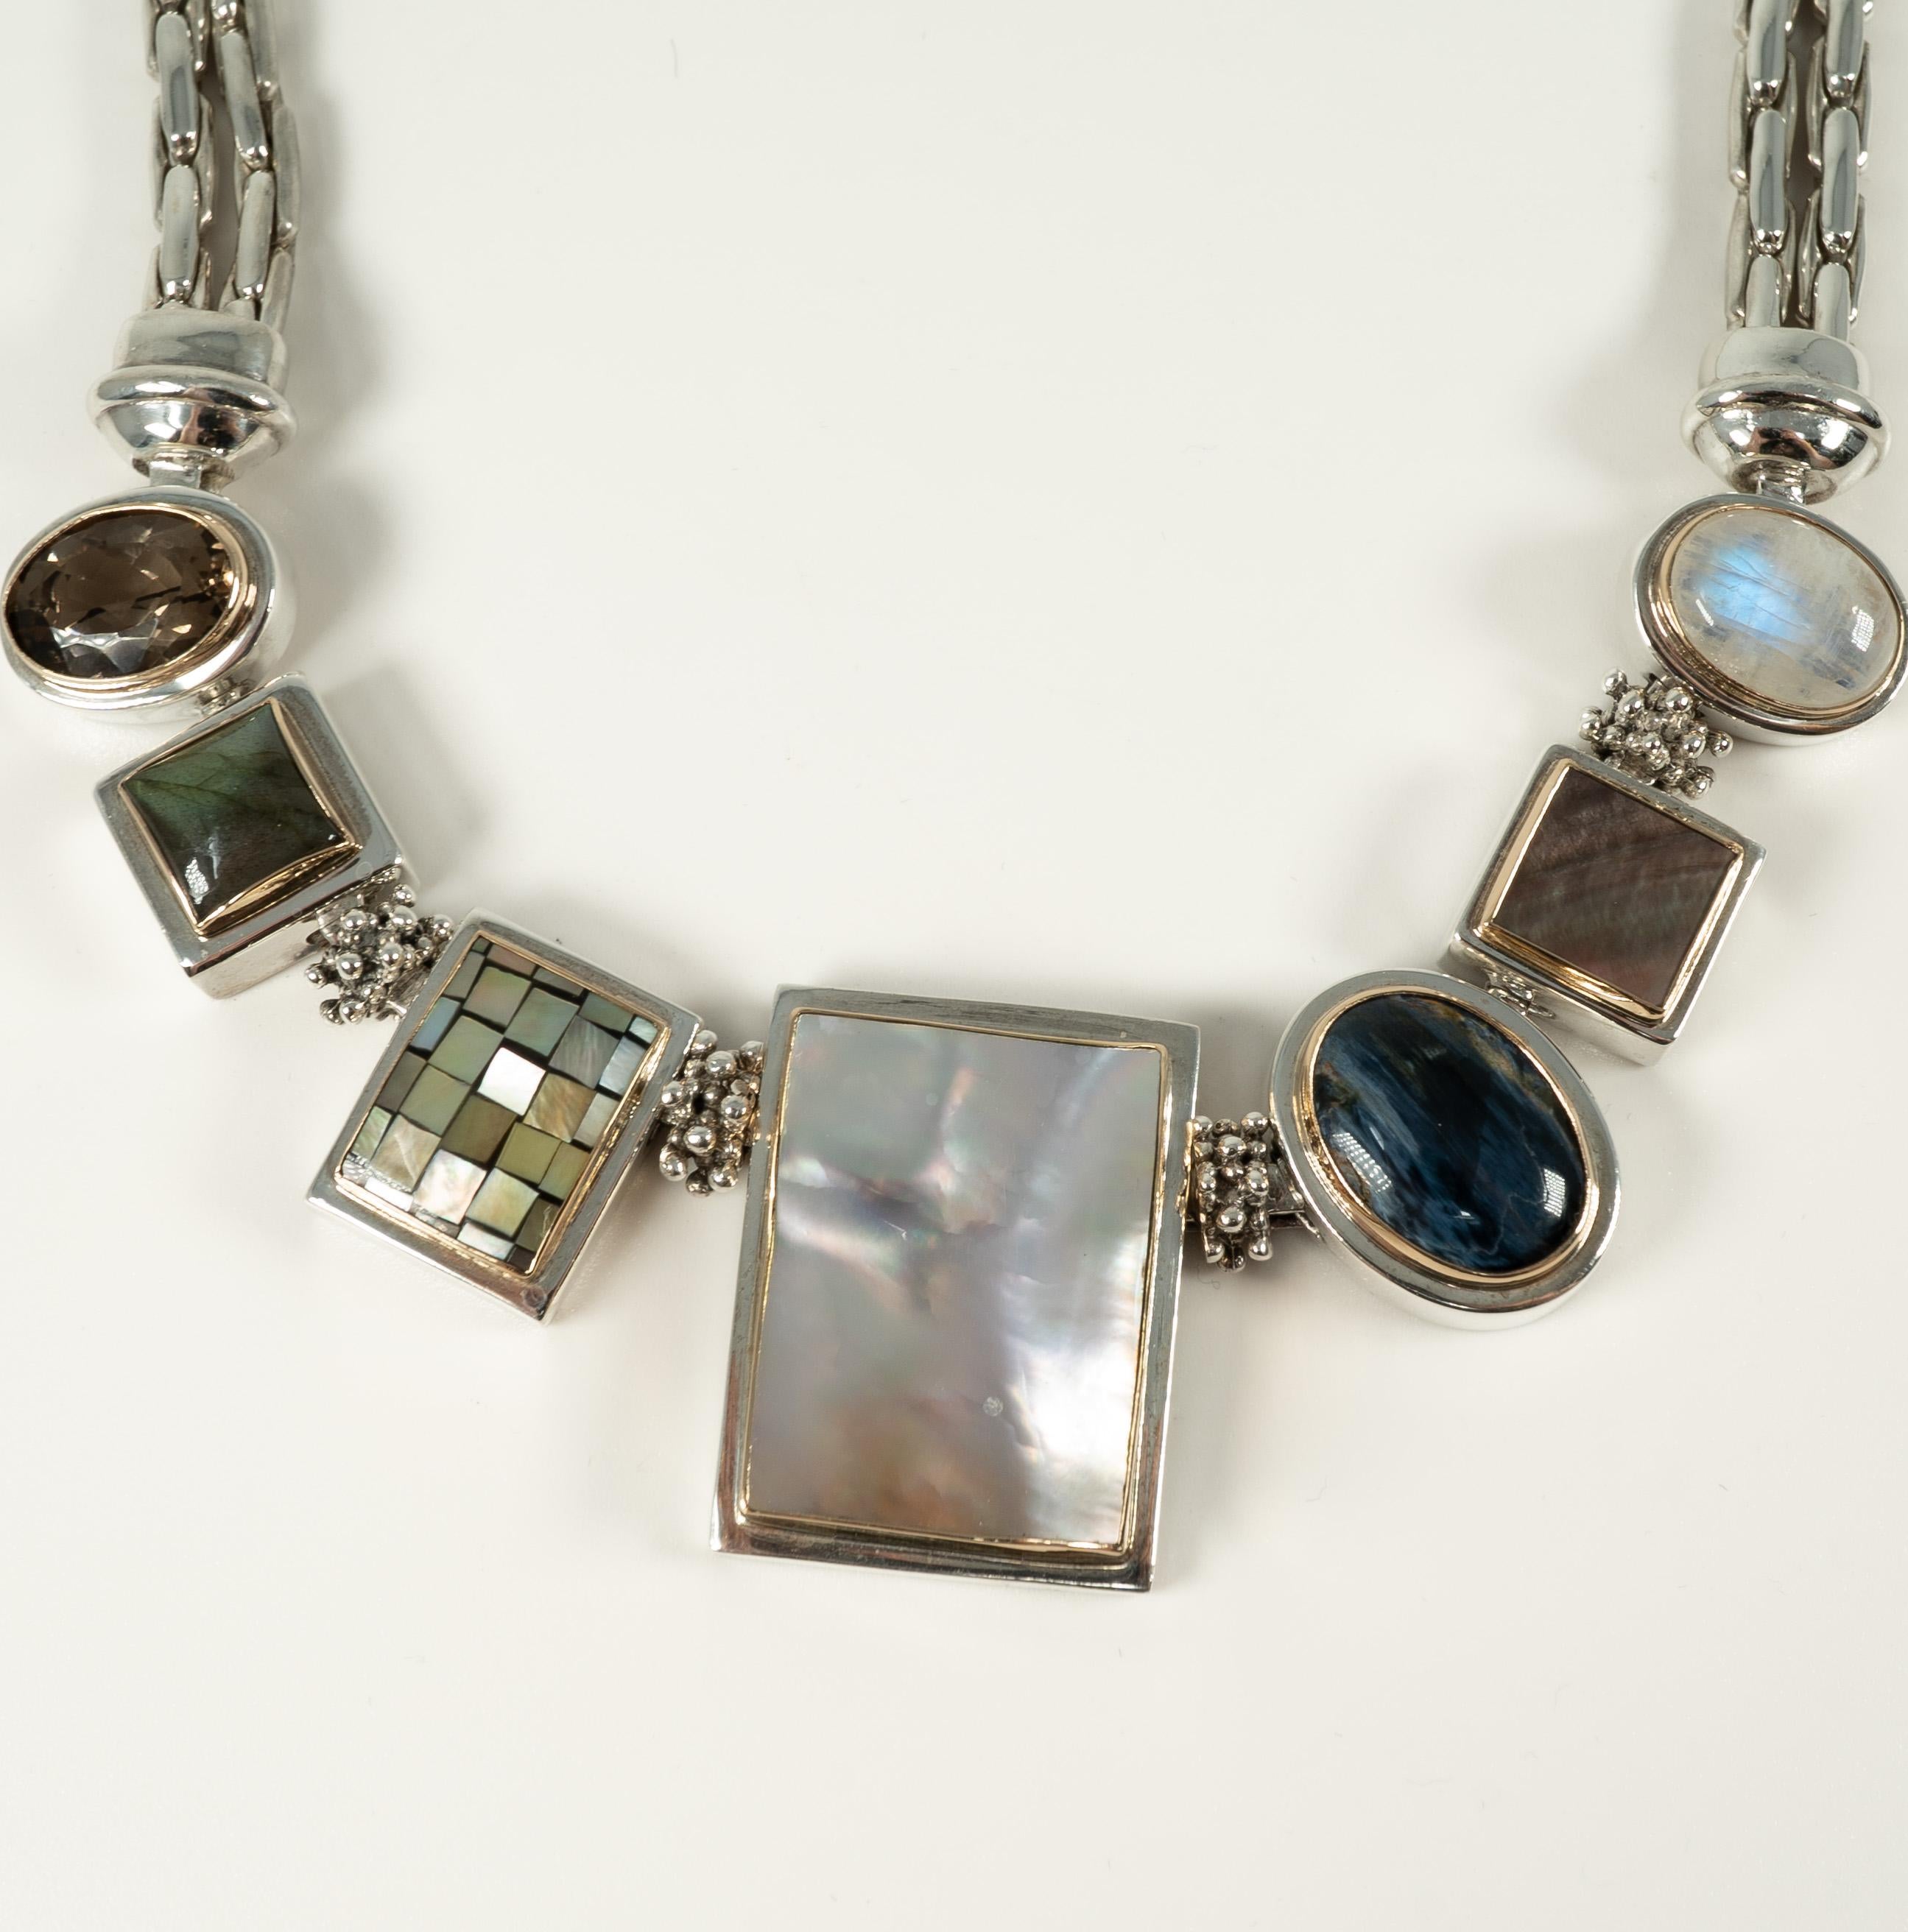 In sterling silver with labrodorite, shell, quartz and hardstones.  Great statement piece!